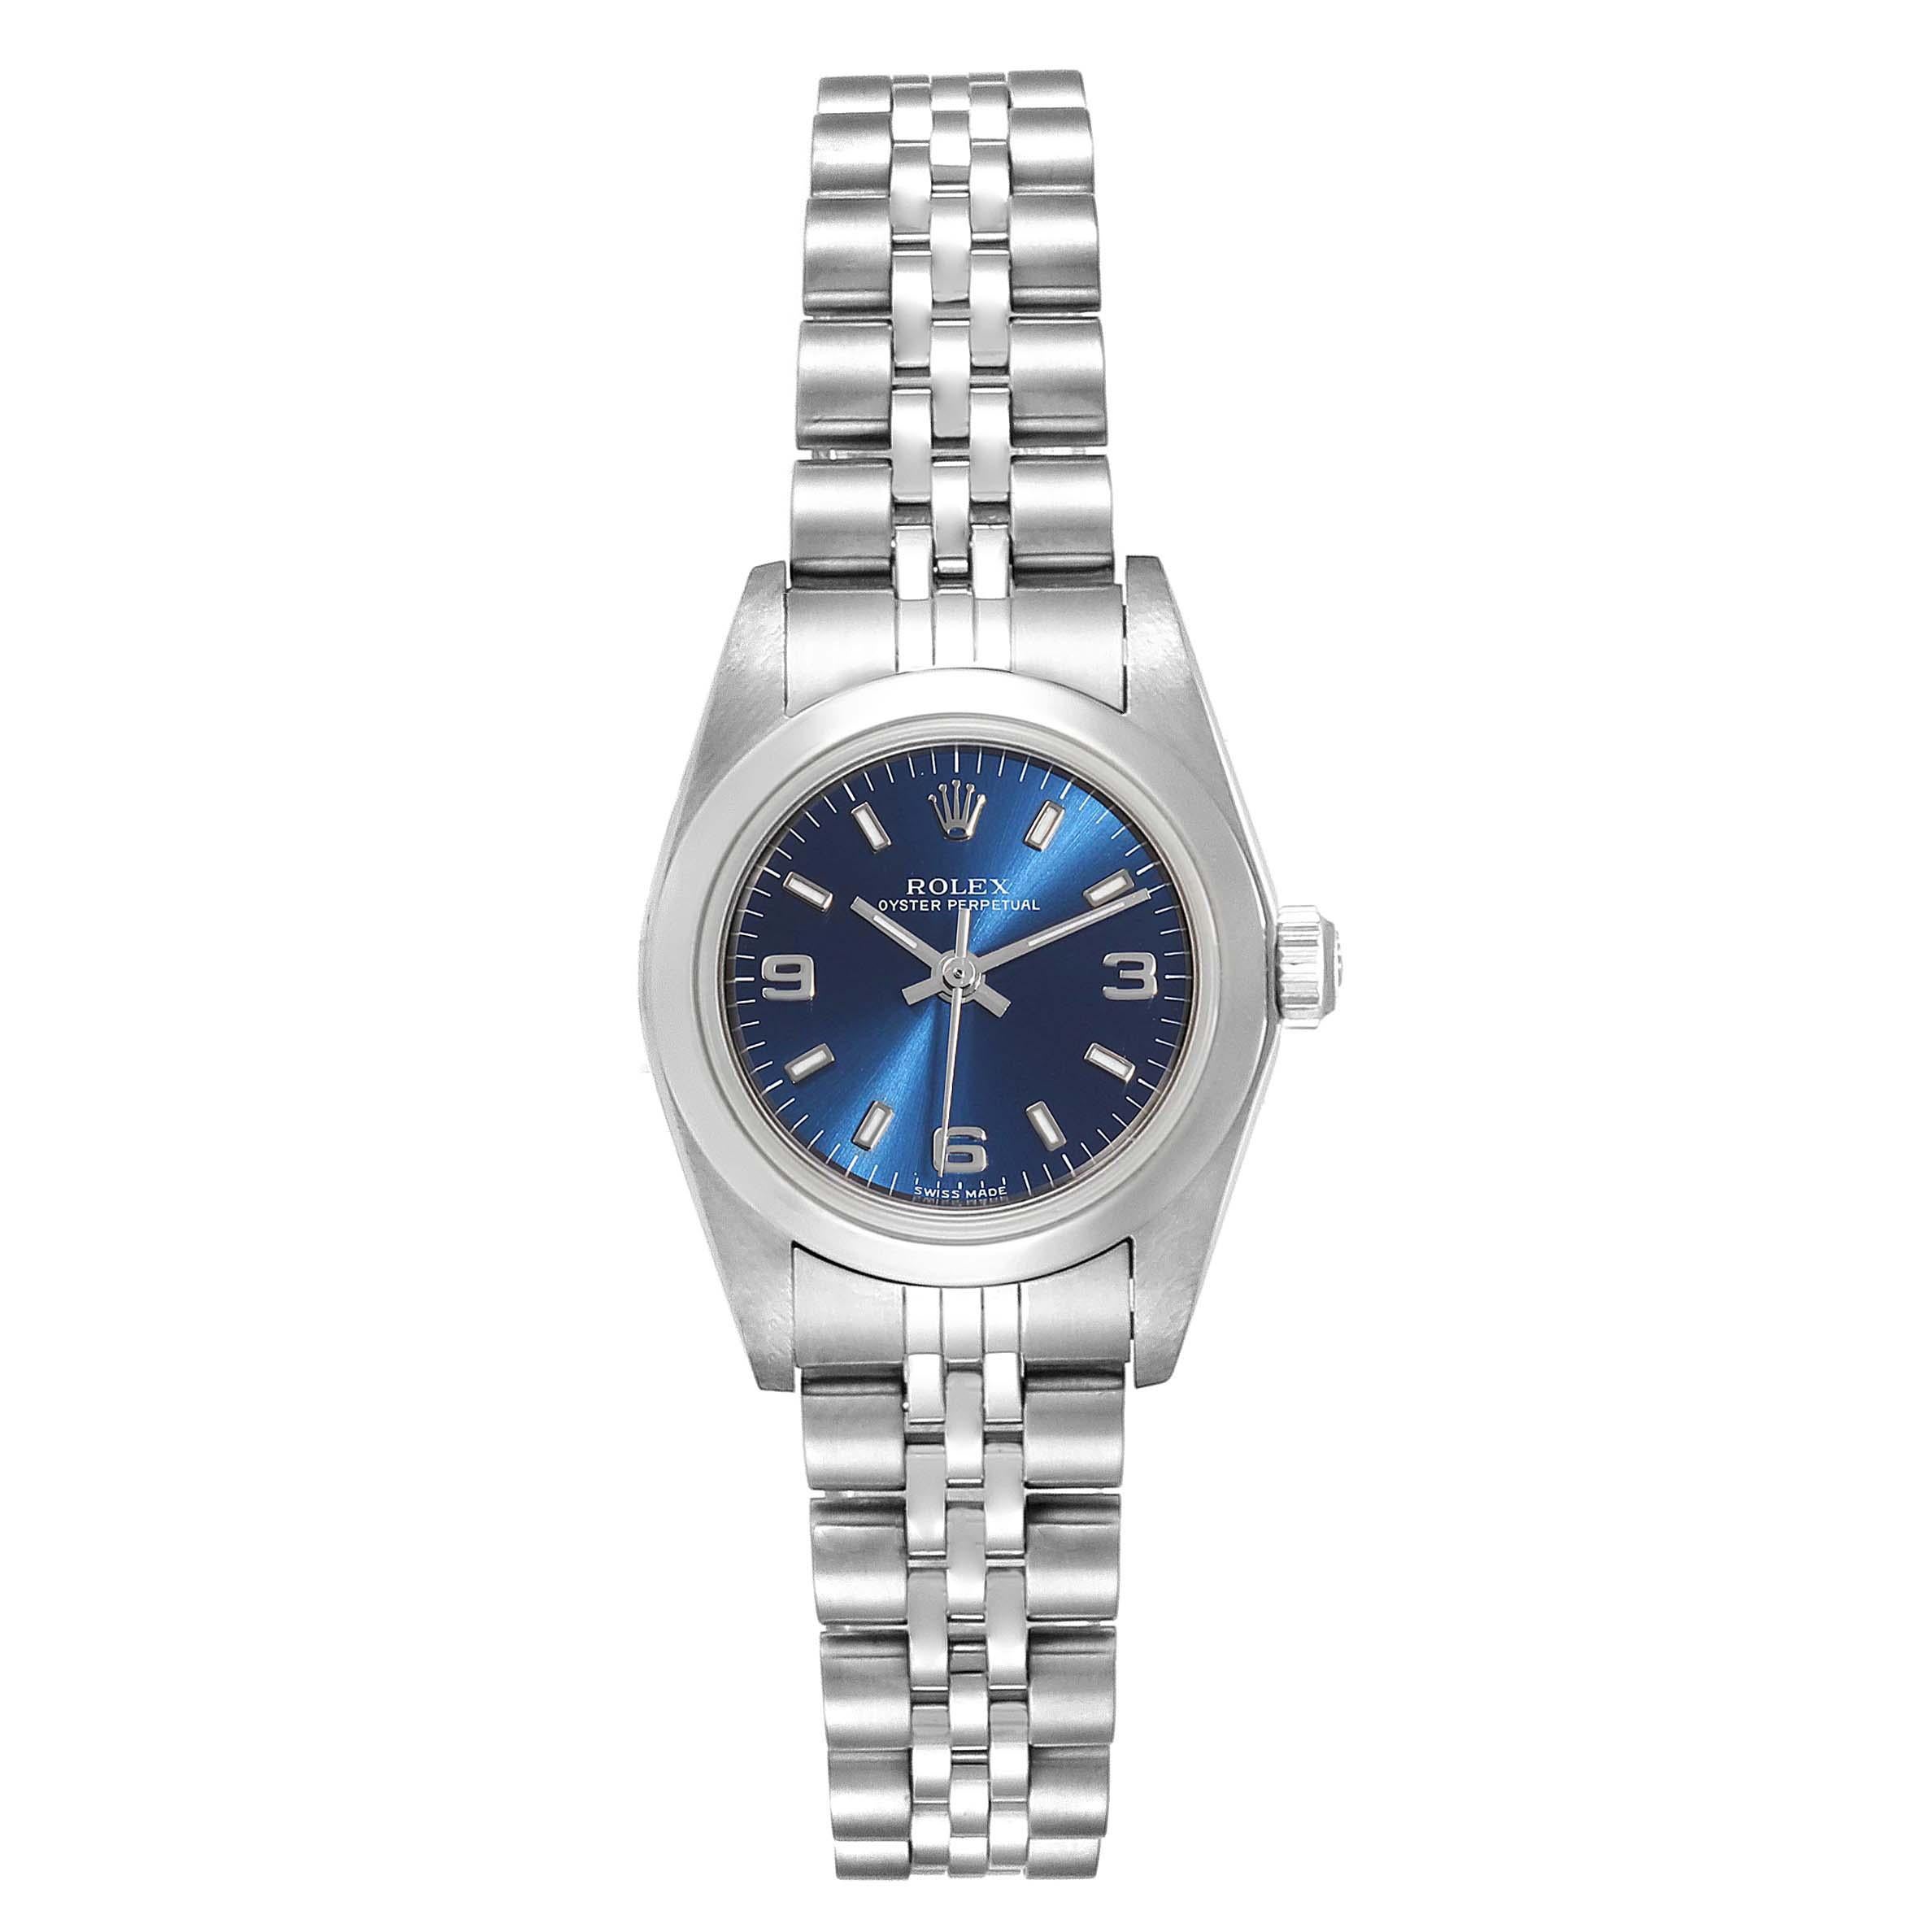 Rolex Oyster Perpetual 24 Nondate Blue Dial Ladies Watch 76080. Officially certified chronometer self-winding movement. Stainless steel oyster case 24.0 mm in diameter. Rolex logo on a crown. Stainless steel smooth domed bezel. Scratch resistant